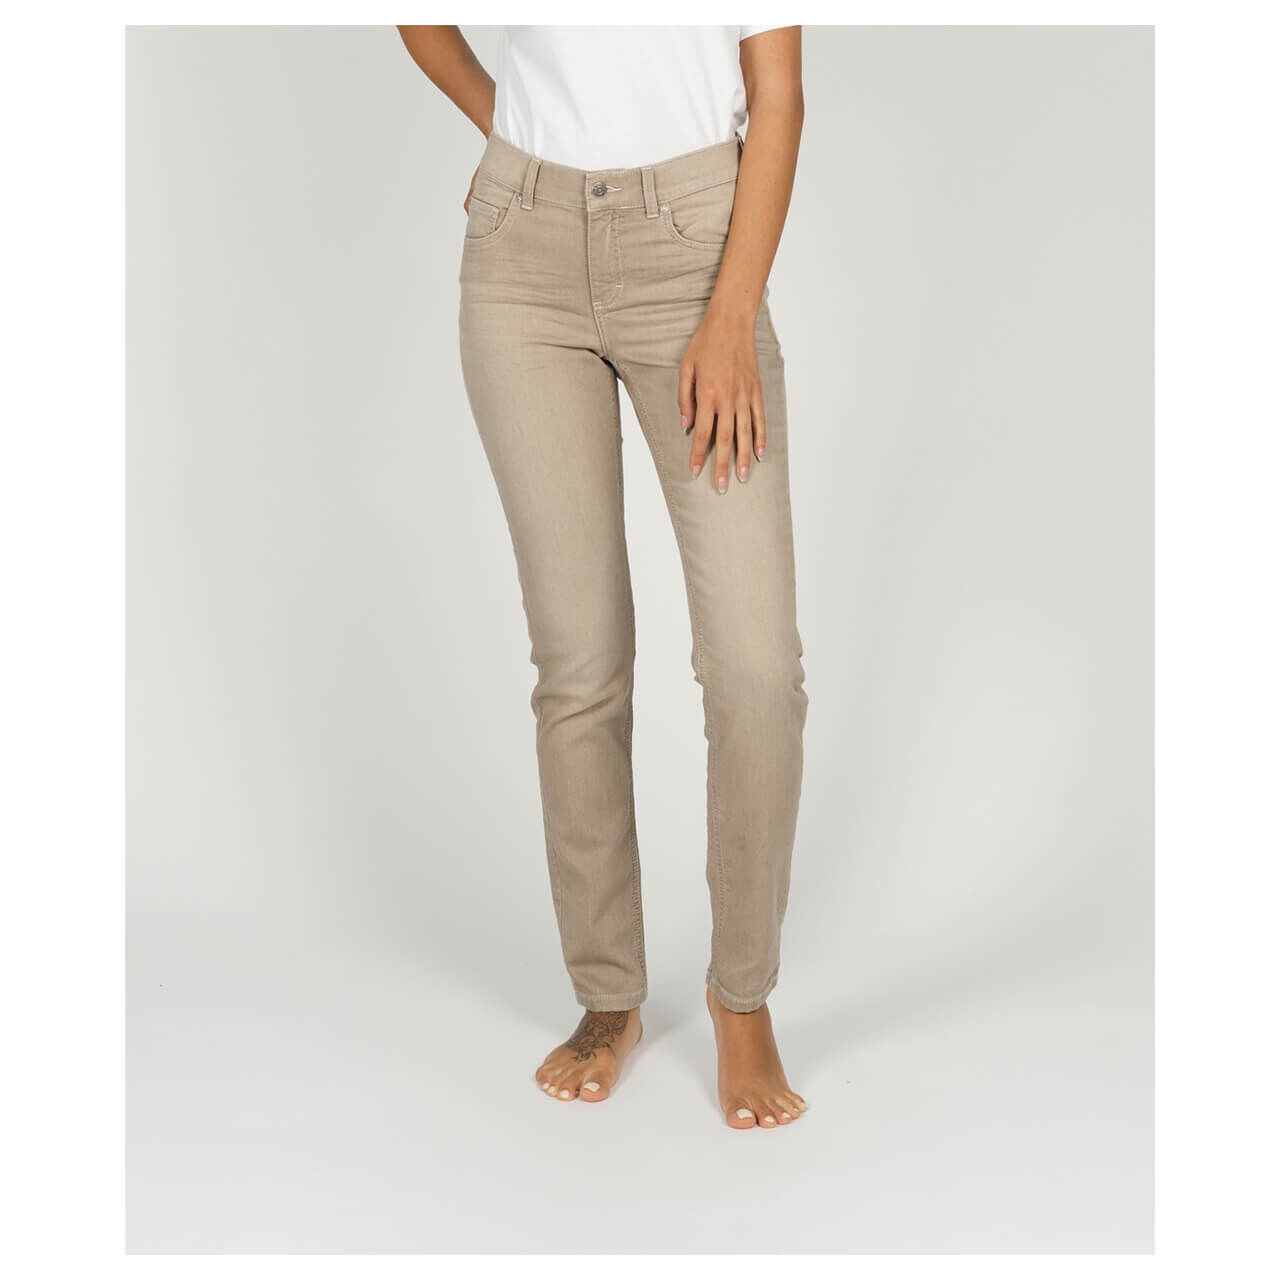 Angels Skinny Jeans cappuccino used